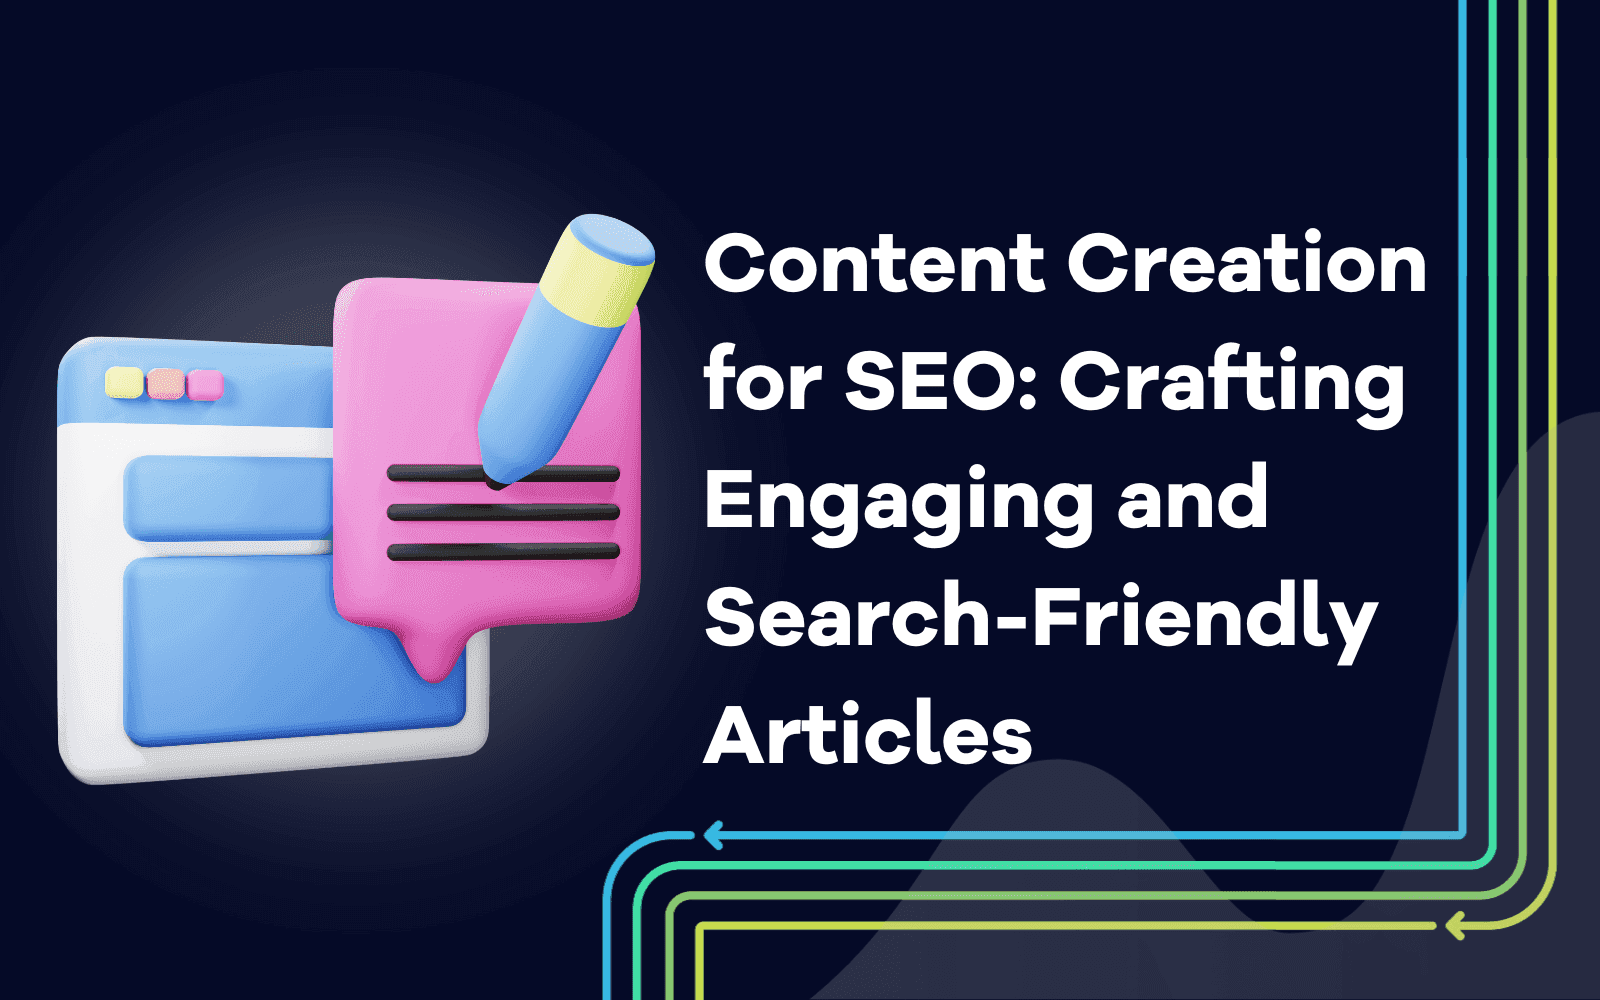 Content Creation for SEO Crafting Engaging and Search-Friendly Articles